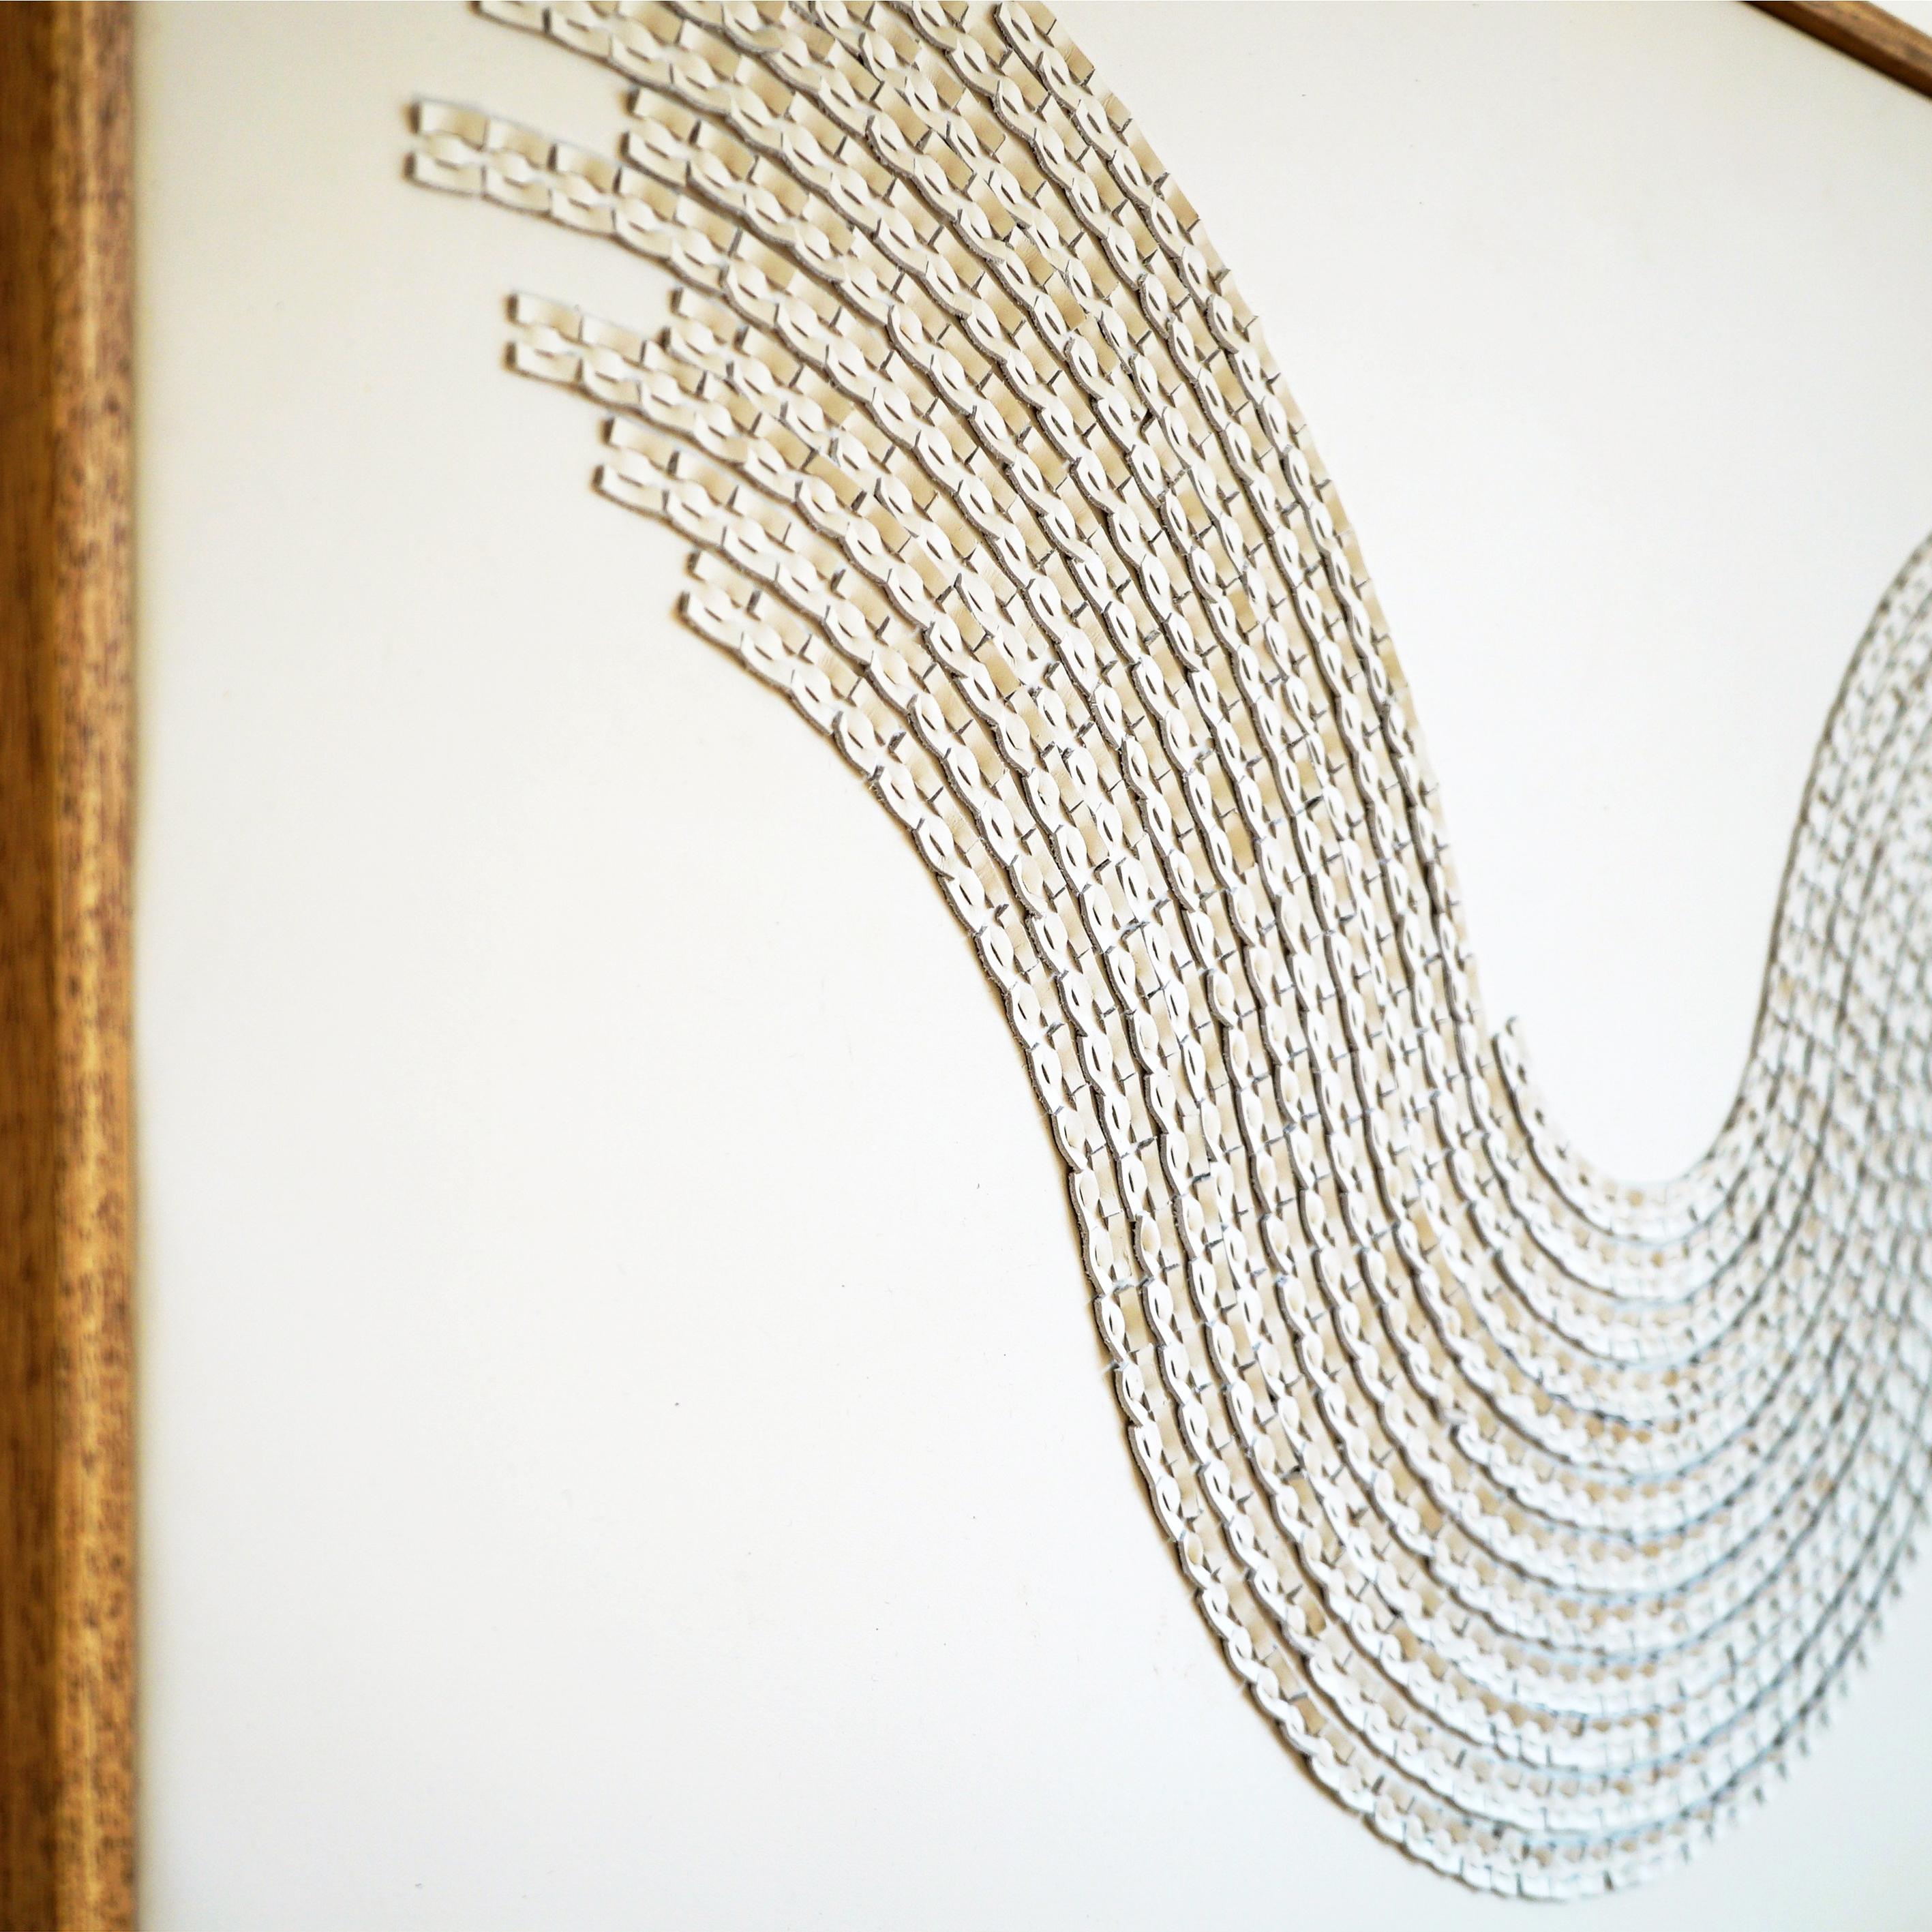 Other Wave, A Piece of 3D Sculptural Cream Leather Wall Art For Sale